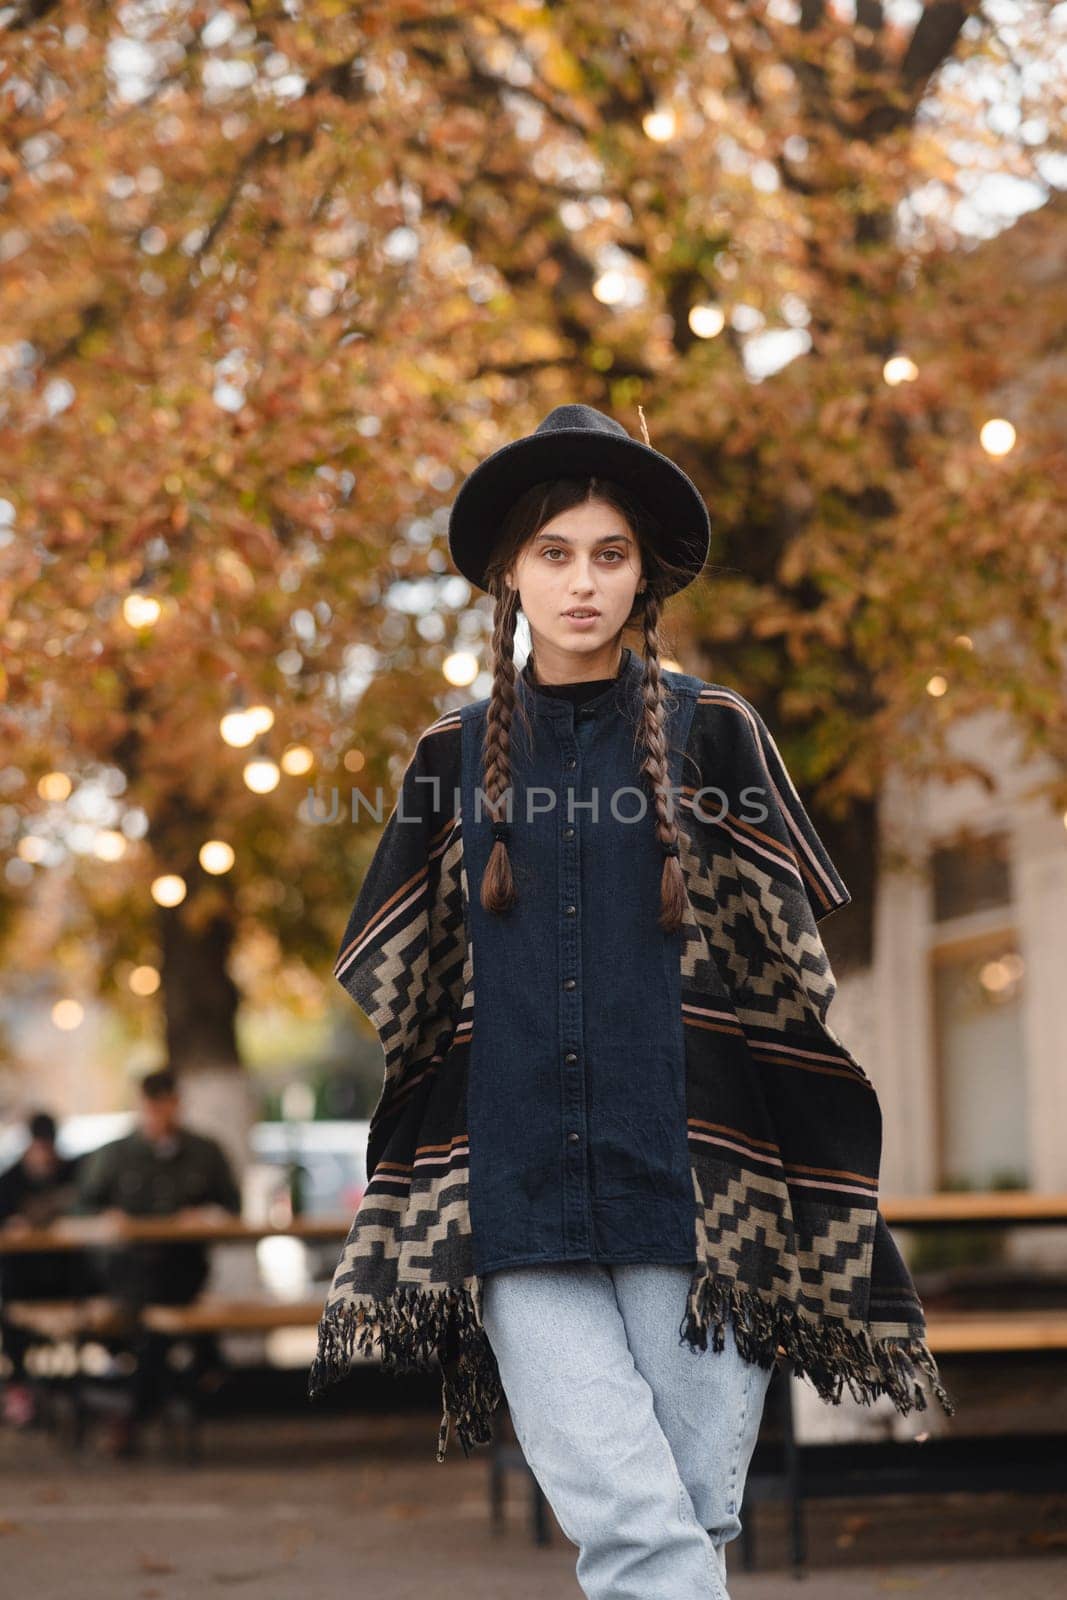 A charming woman, embracing boho fashion, completes her ensemble with a black hat in the autumn city. by teksomolika